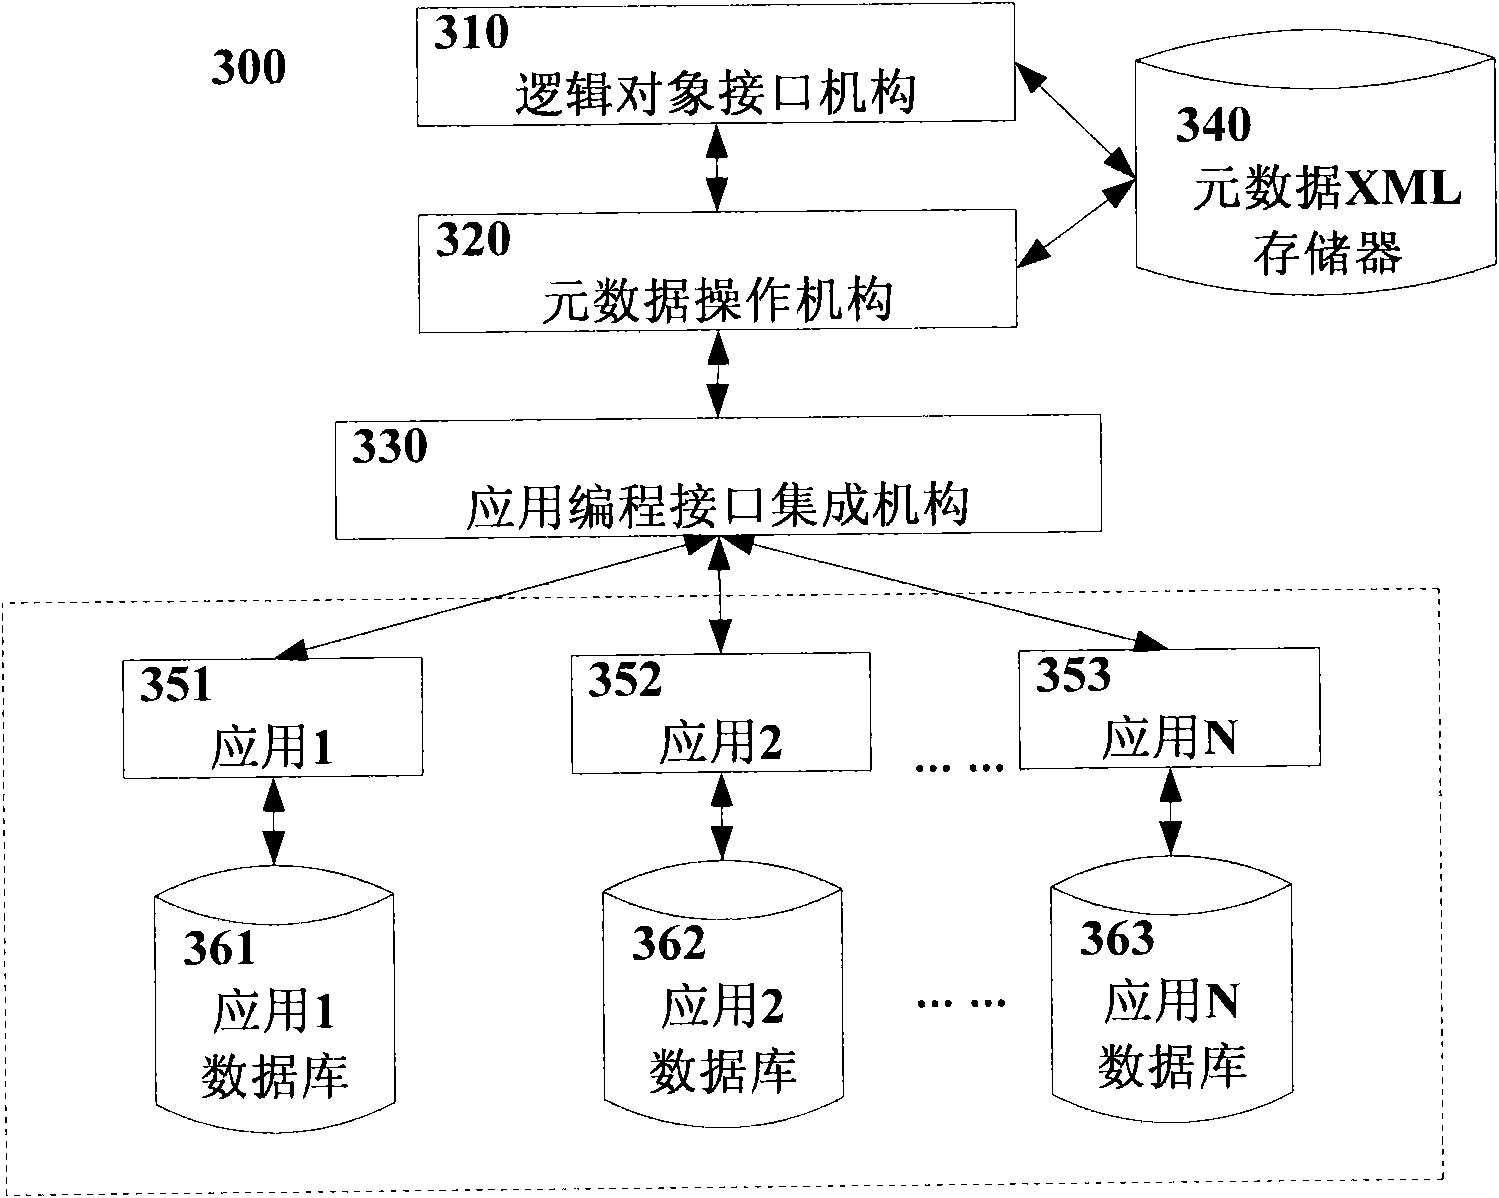 Method and equipment for injecting data into applied database